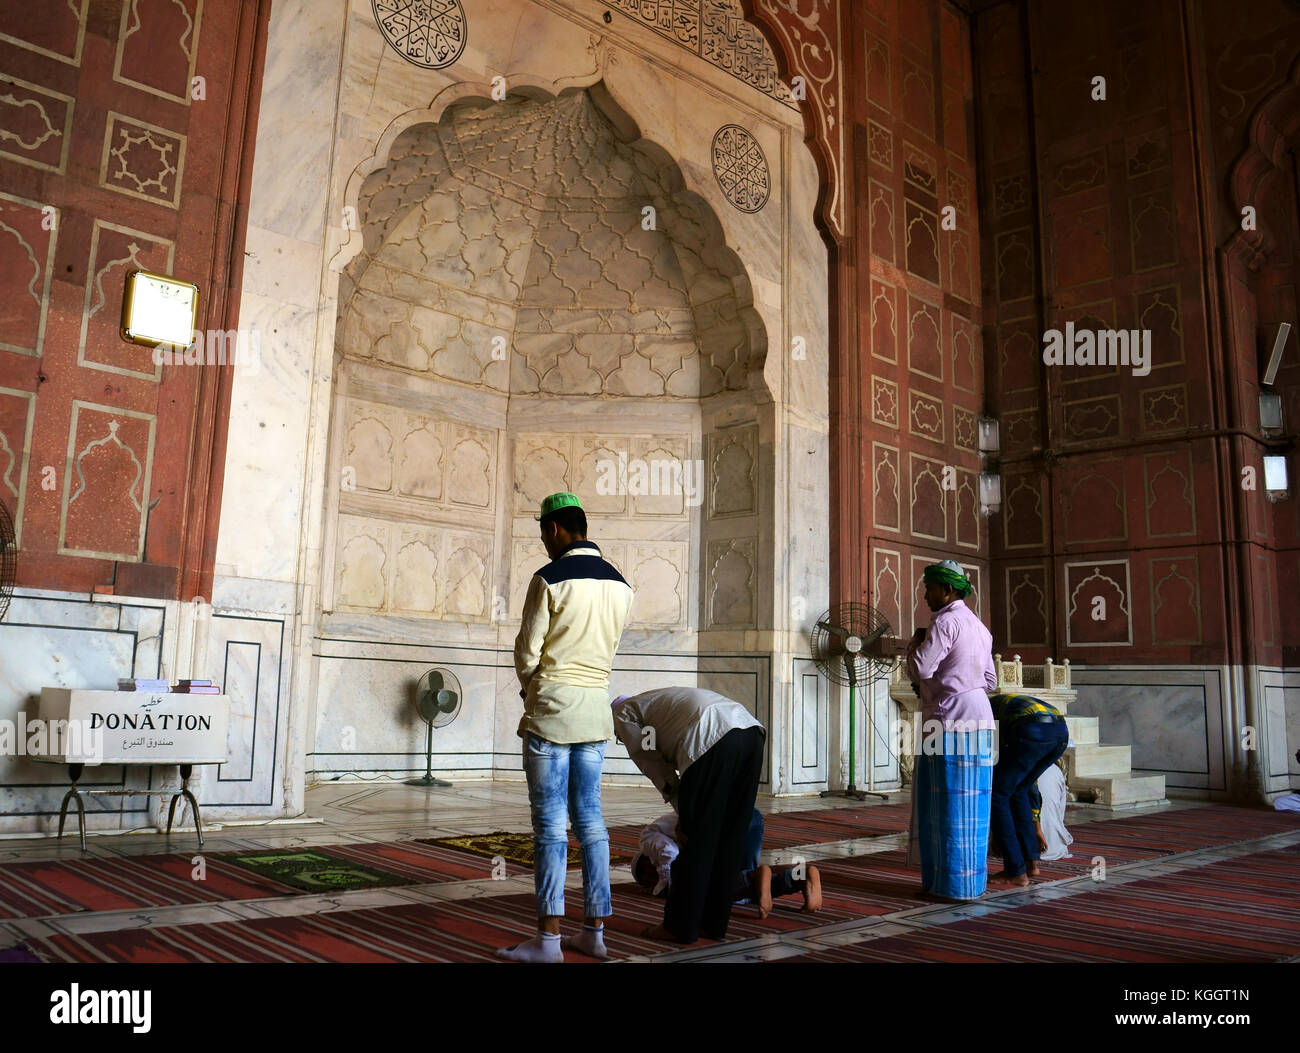 Muslims during Friday prayer in Fatehpuri Masjid mosque in Old Delhi, India Stock Photo